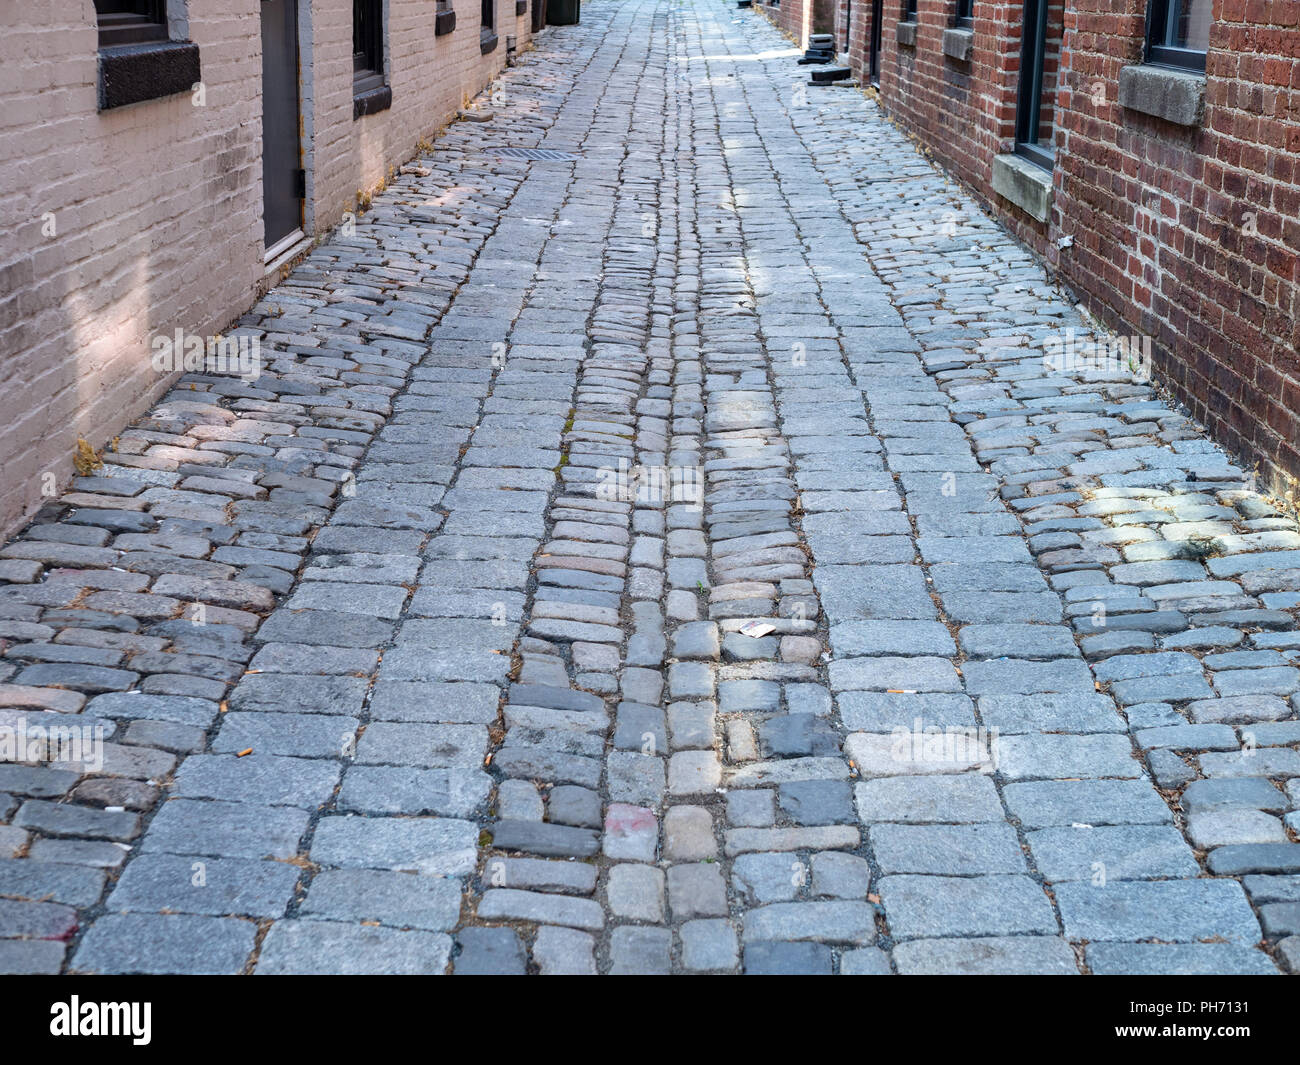 Cobblestone street in the daytime moving through a brick alleyway Stock Photo